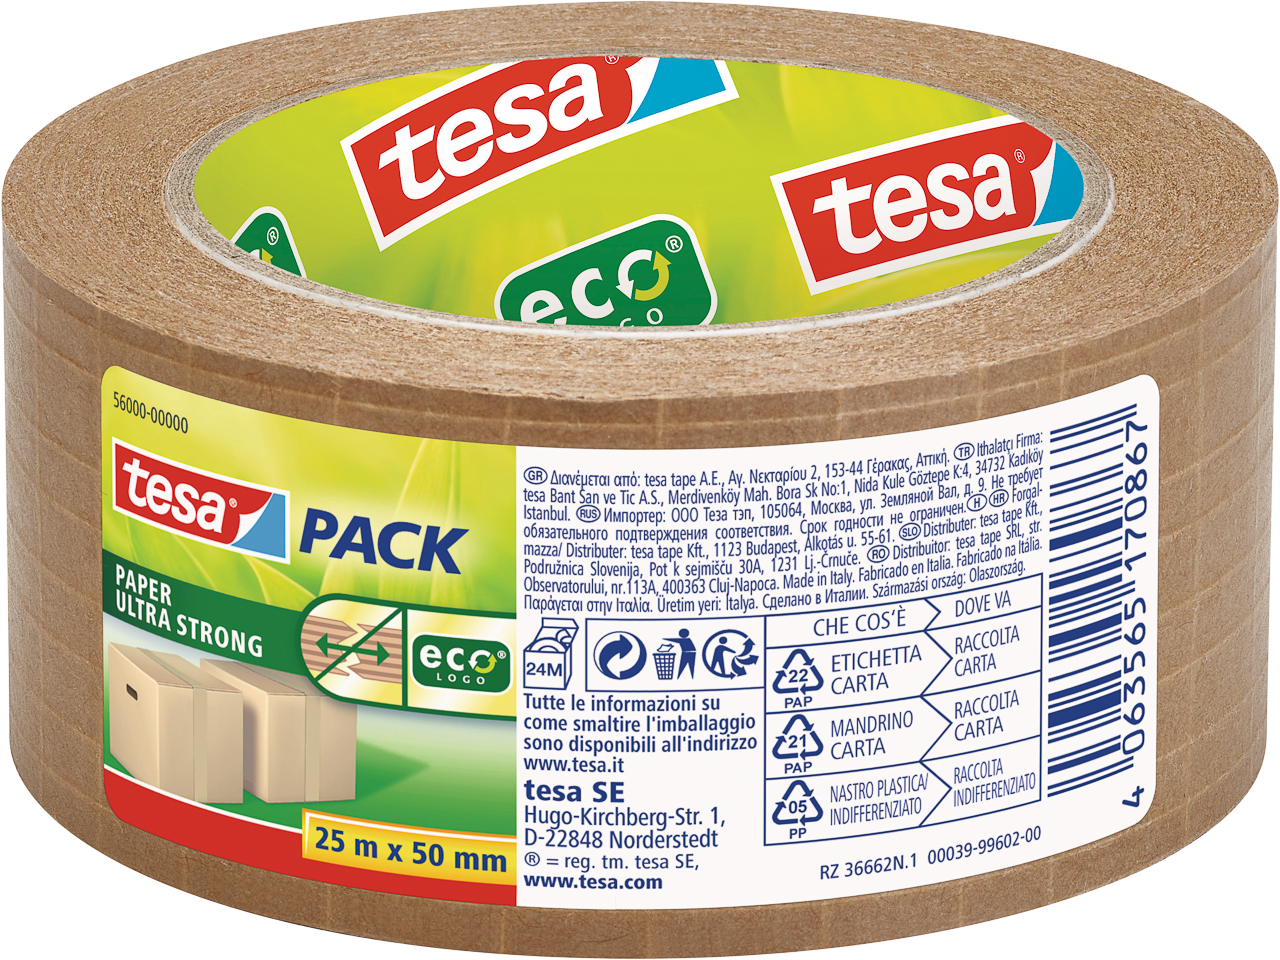 TESAPACK ULTRA STRONG PAP PACKAGING TAPE 56000-00000-00 25mx50mm brown 1